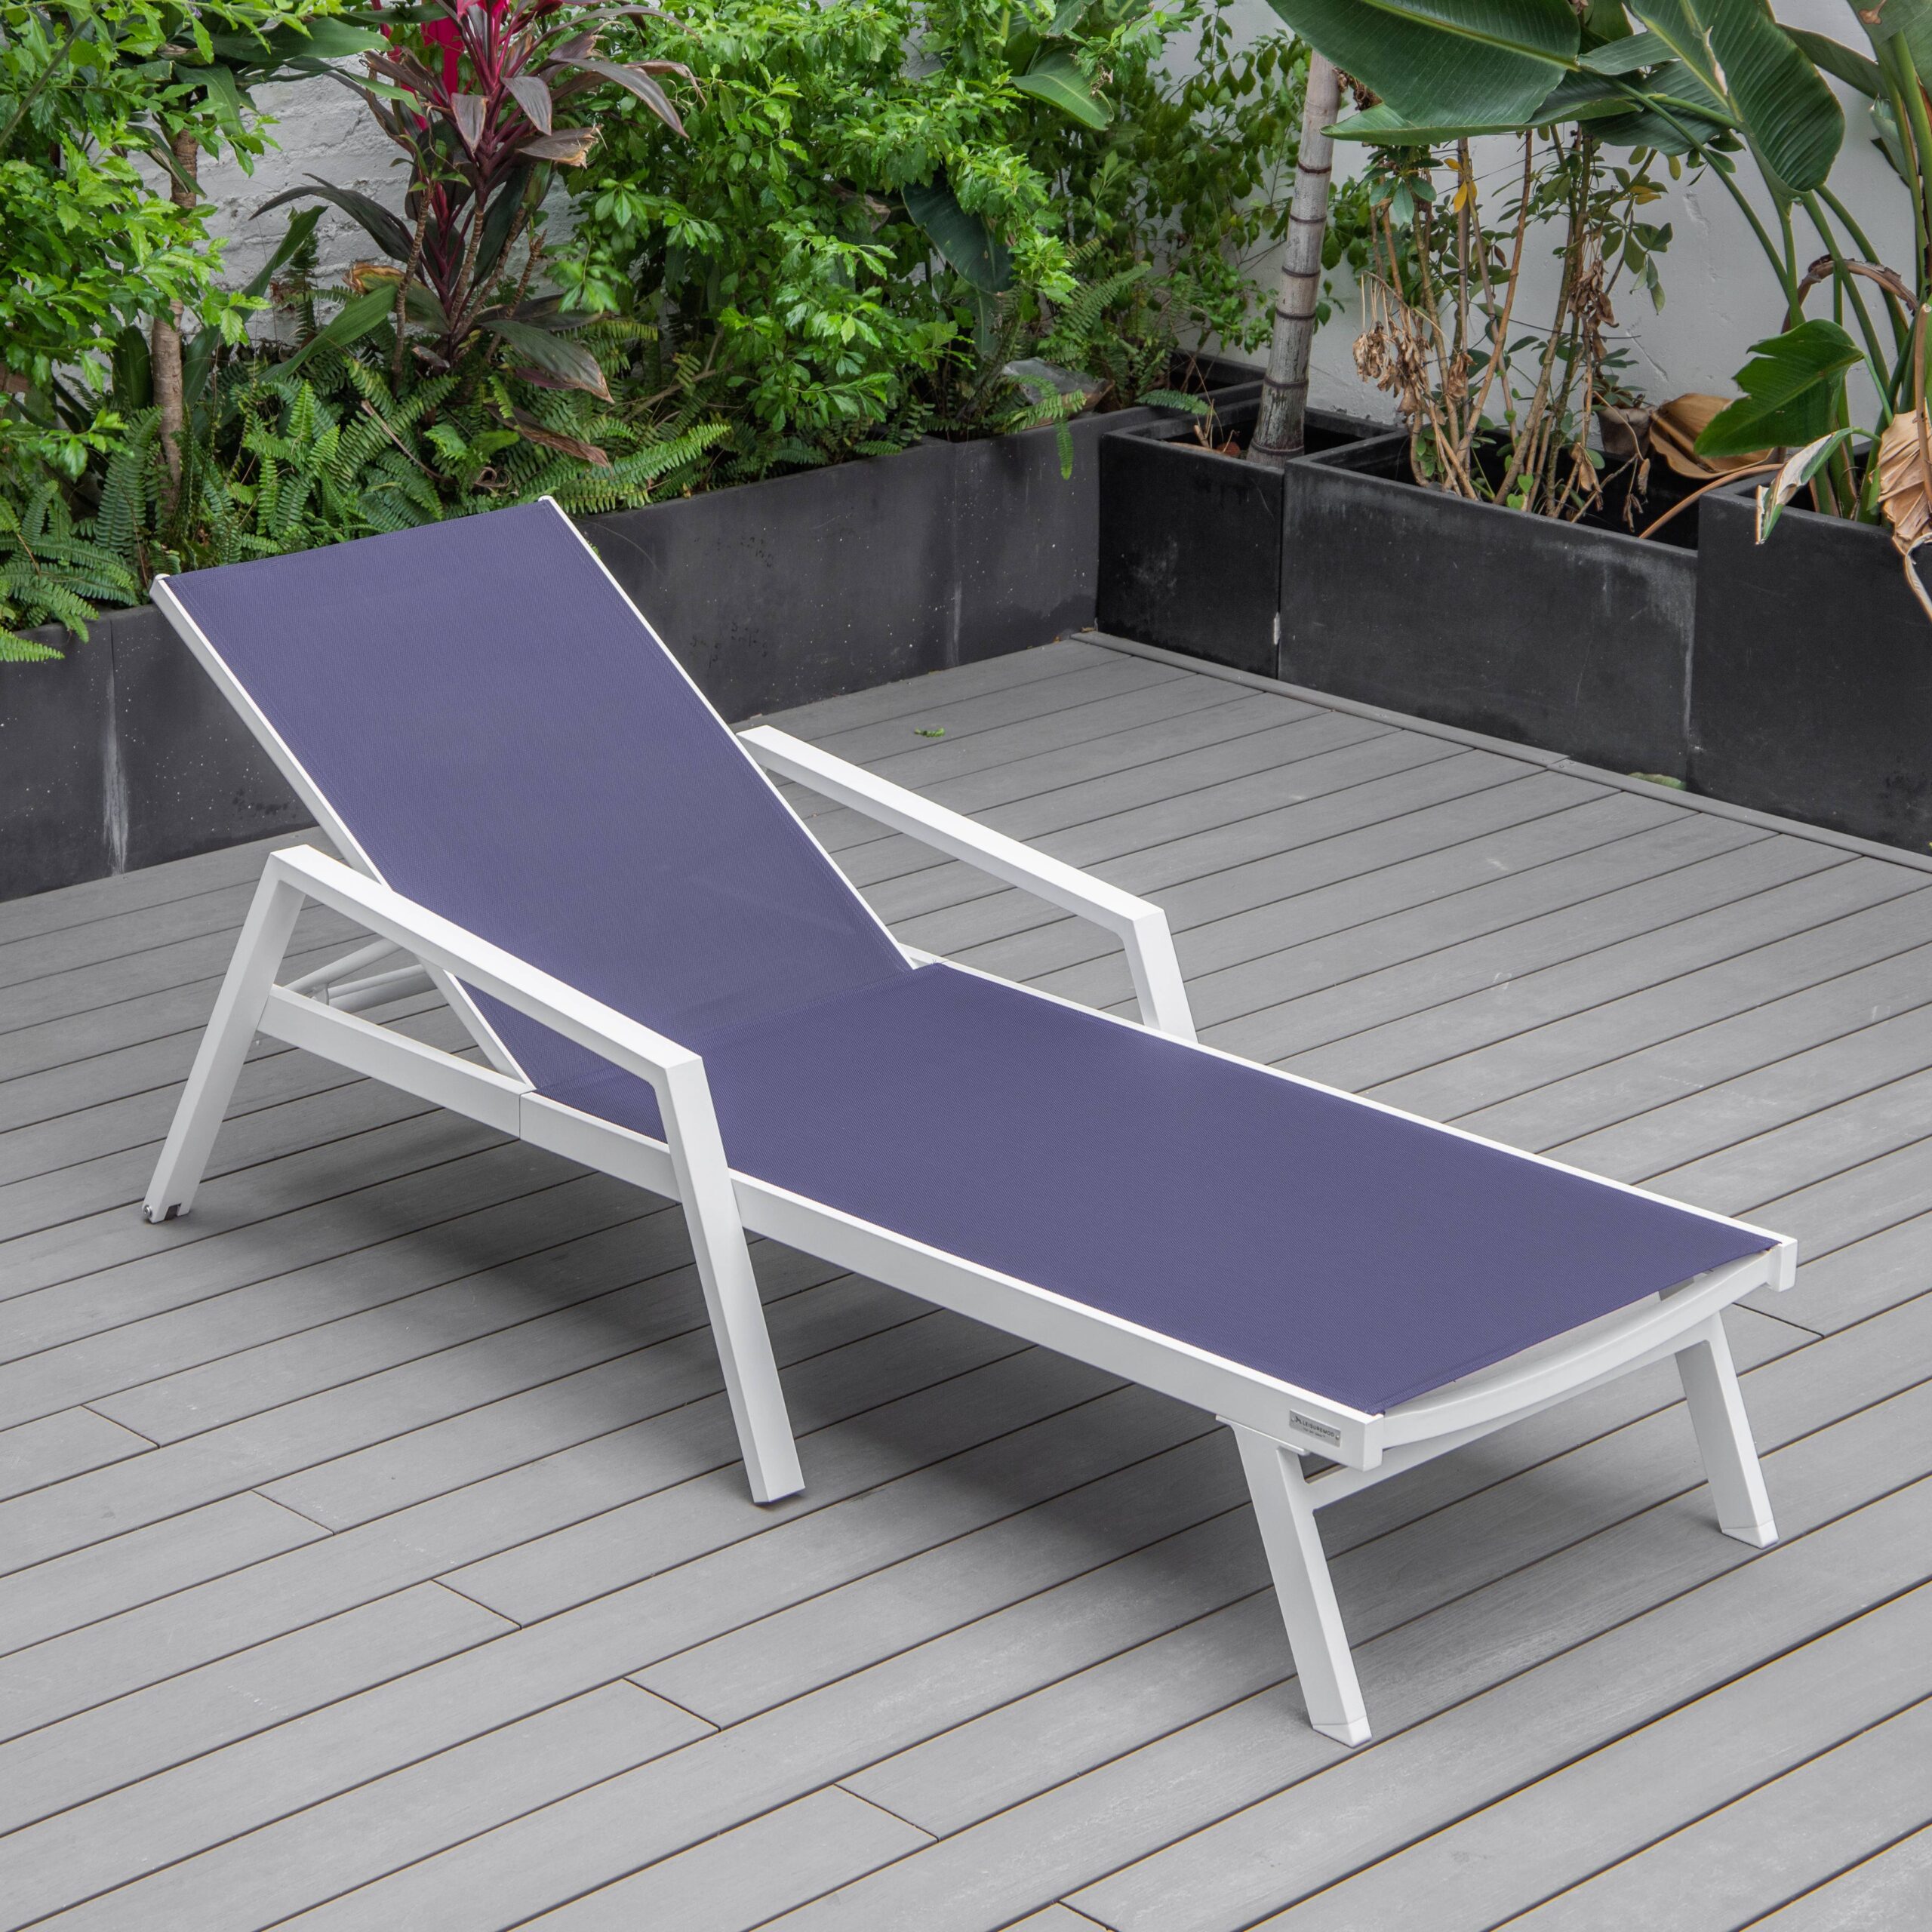 LeisureMod Marlin Patio Chaise Lounge Chair with Armrests Poolside Outdoor Chaise Lounge Chair for Patio Lawn & Garden Modern White Aluminum Suntan Chair with Sling Chaise Lounge Chair (Navy Blue) - image 4 of 12